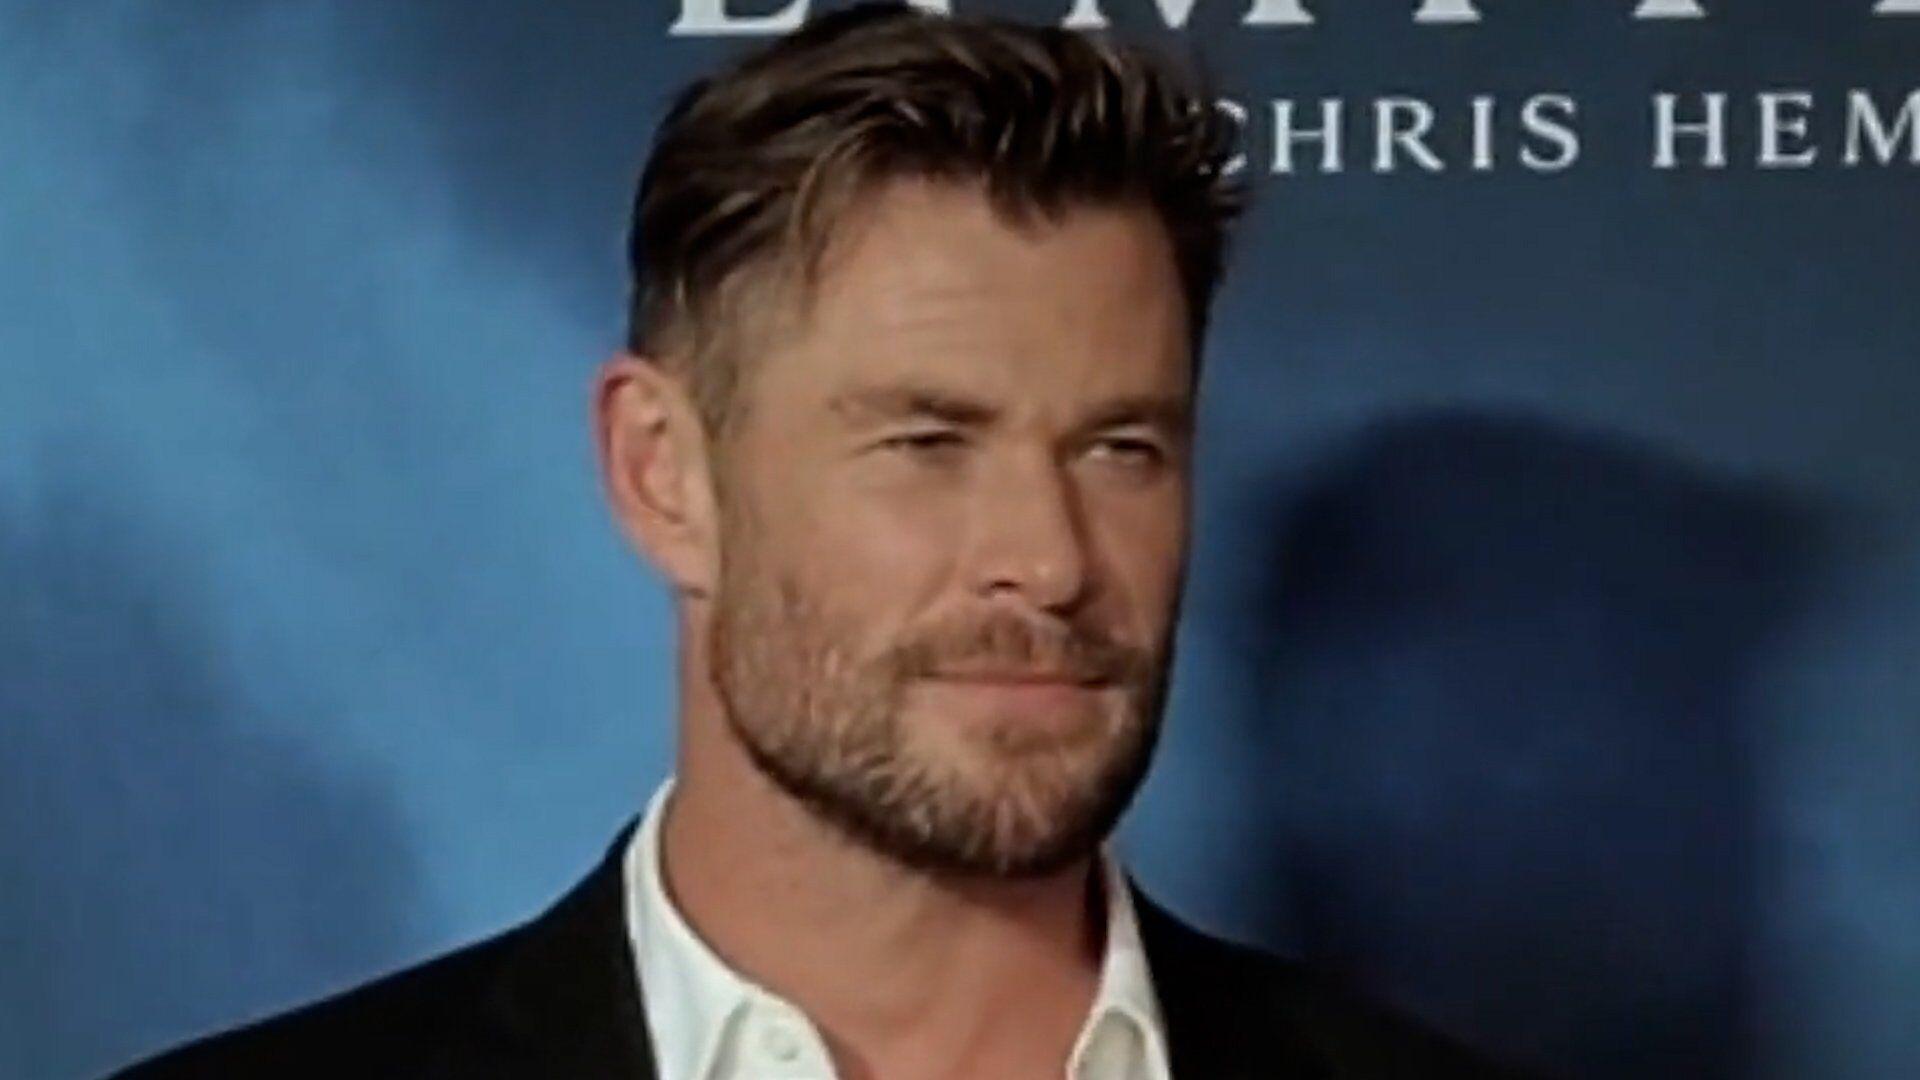 Chris Hemsworth discovers he may be at risk for Alzheimer's disease in new  series, 'Limitless' - Good Morning America